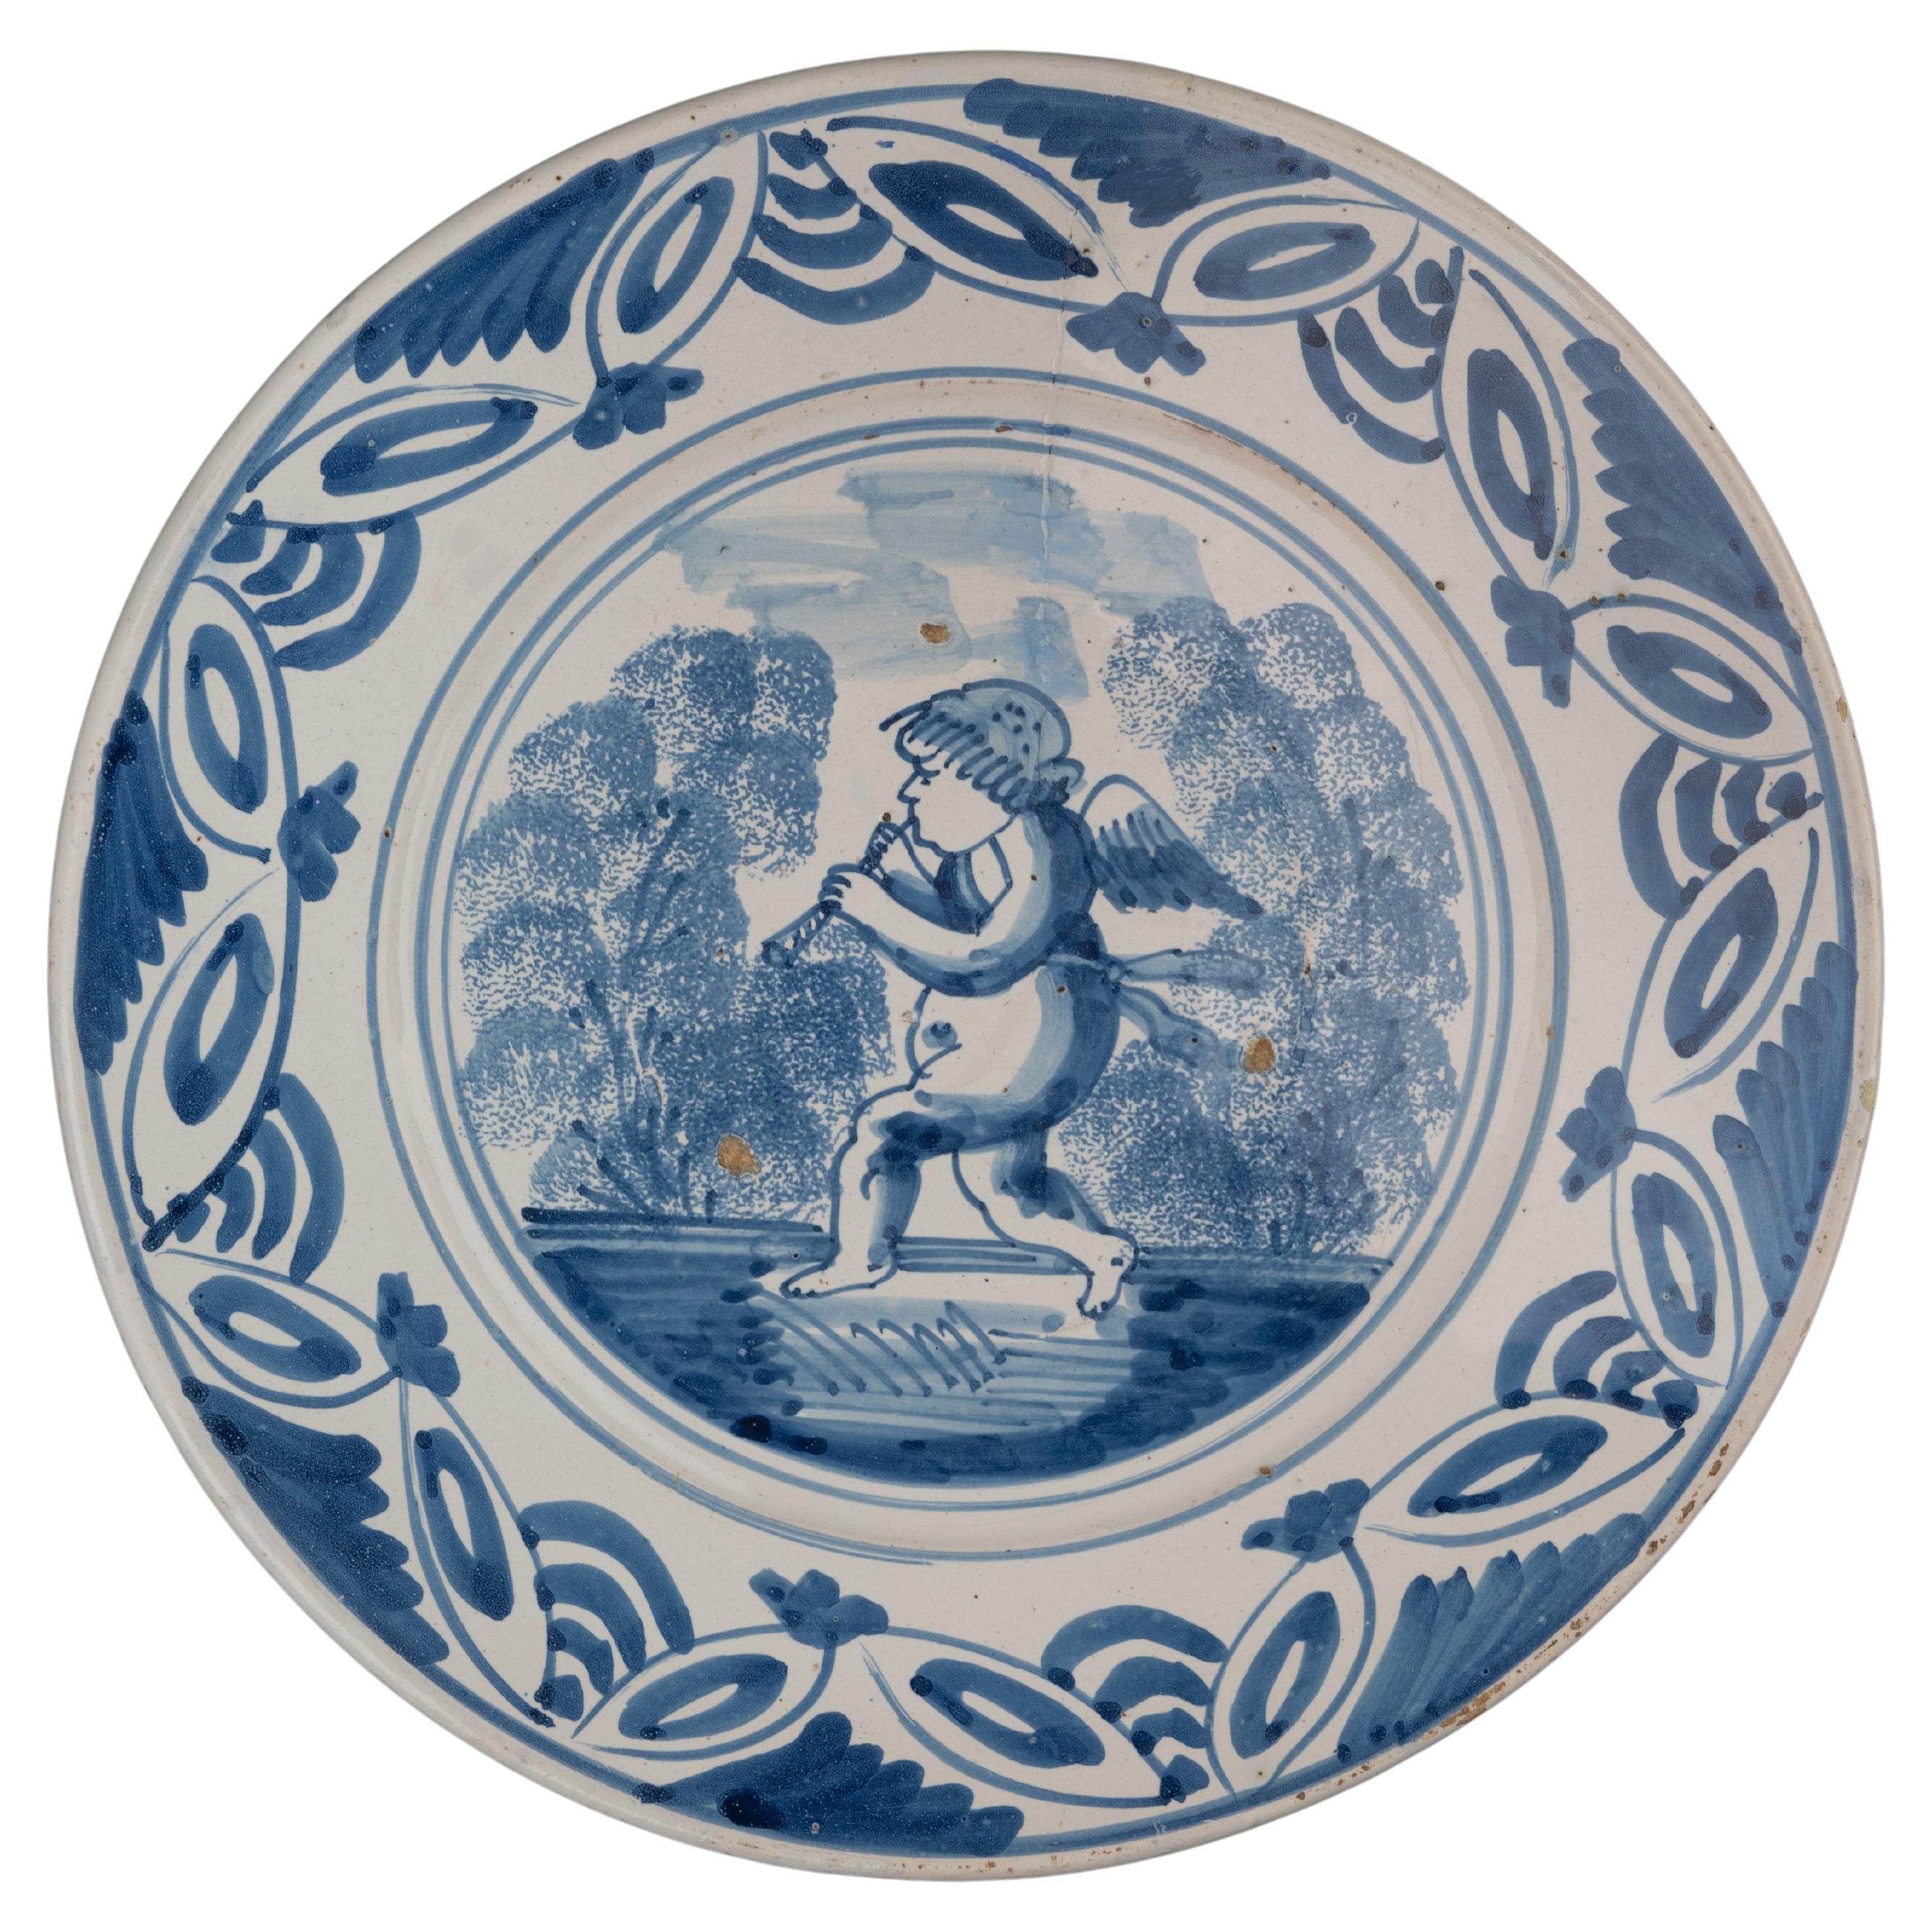 Delft Blue and White Dish with a Flute-Playing Putto, the Netherlands, 1660-1700 For Sale